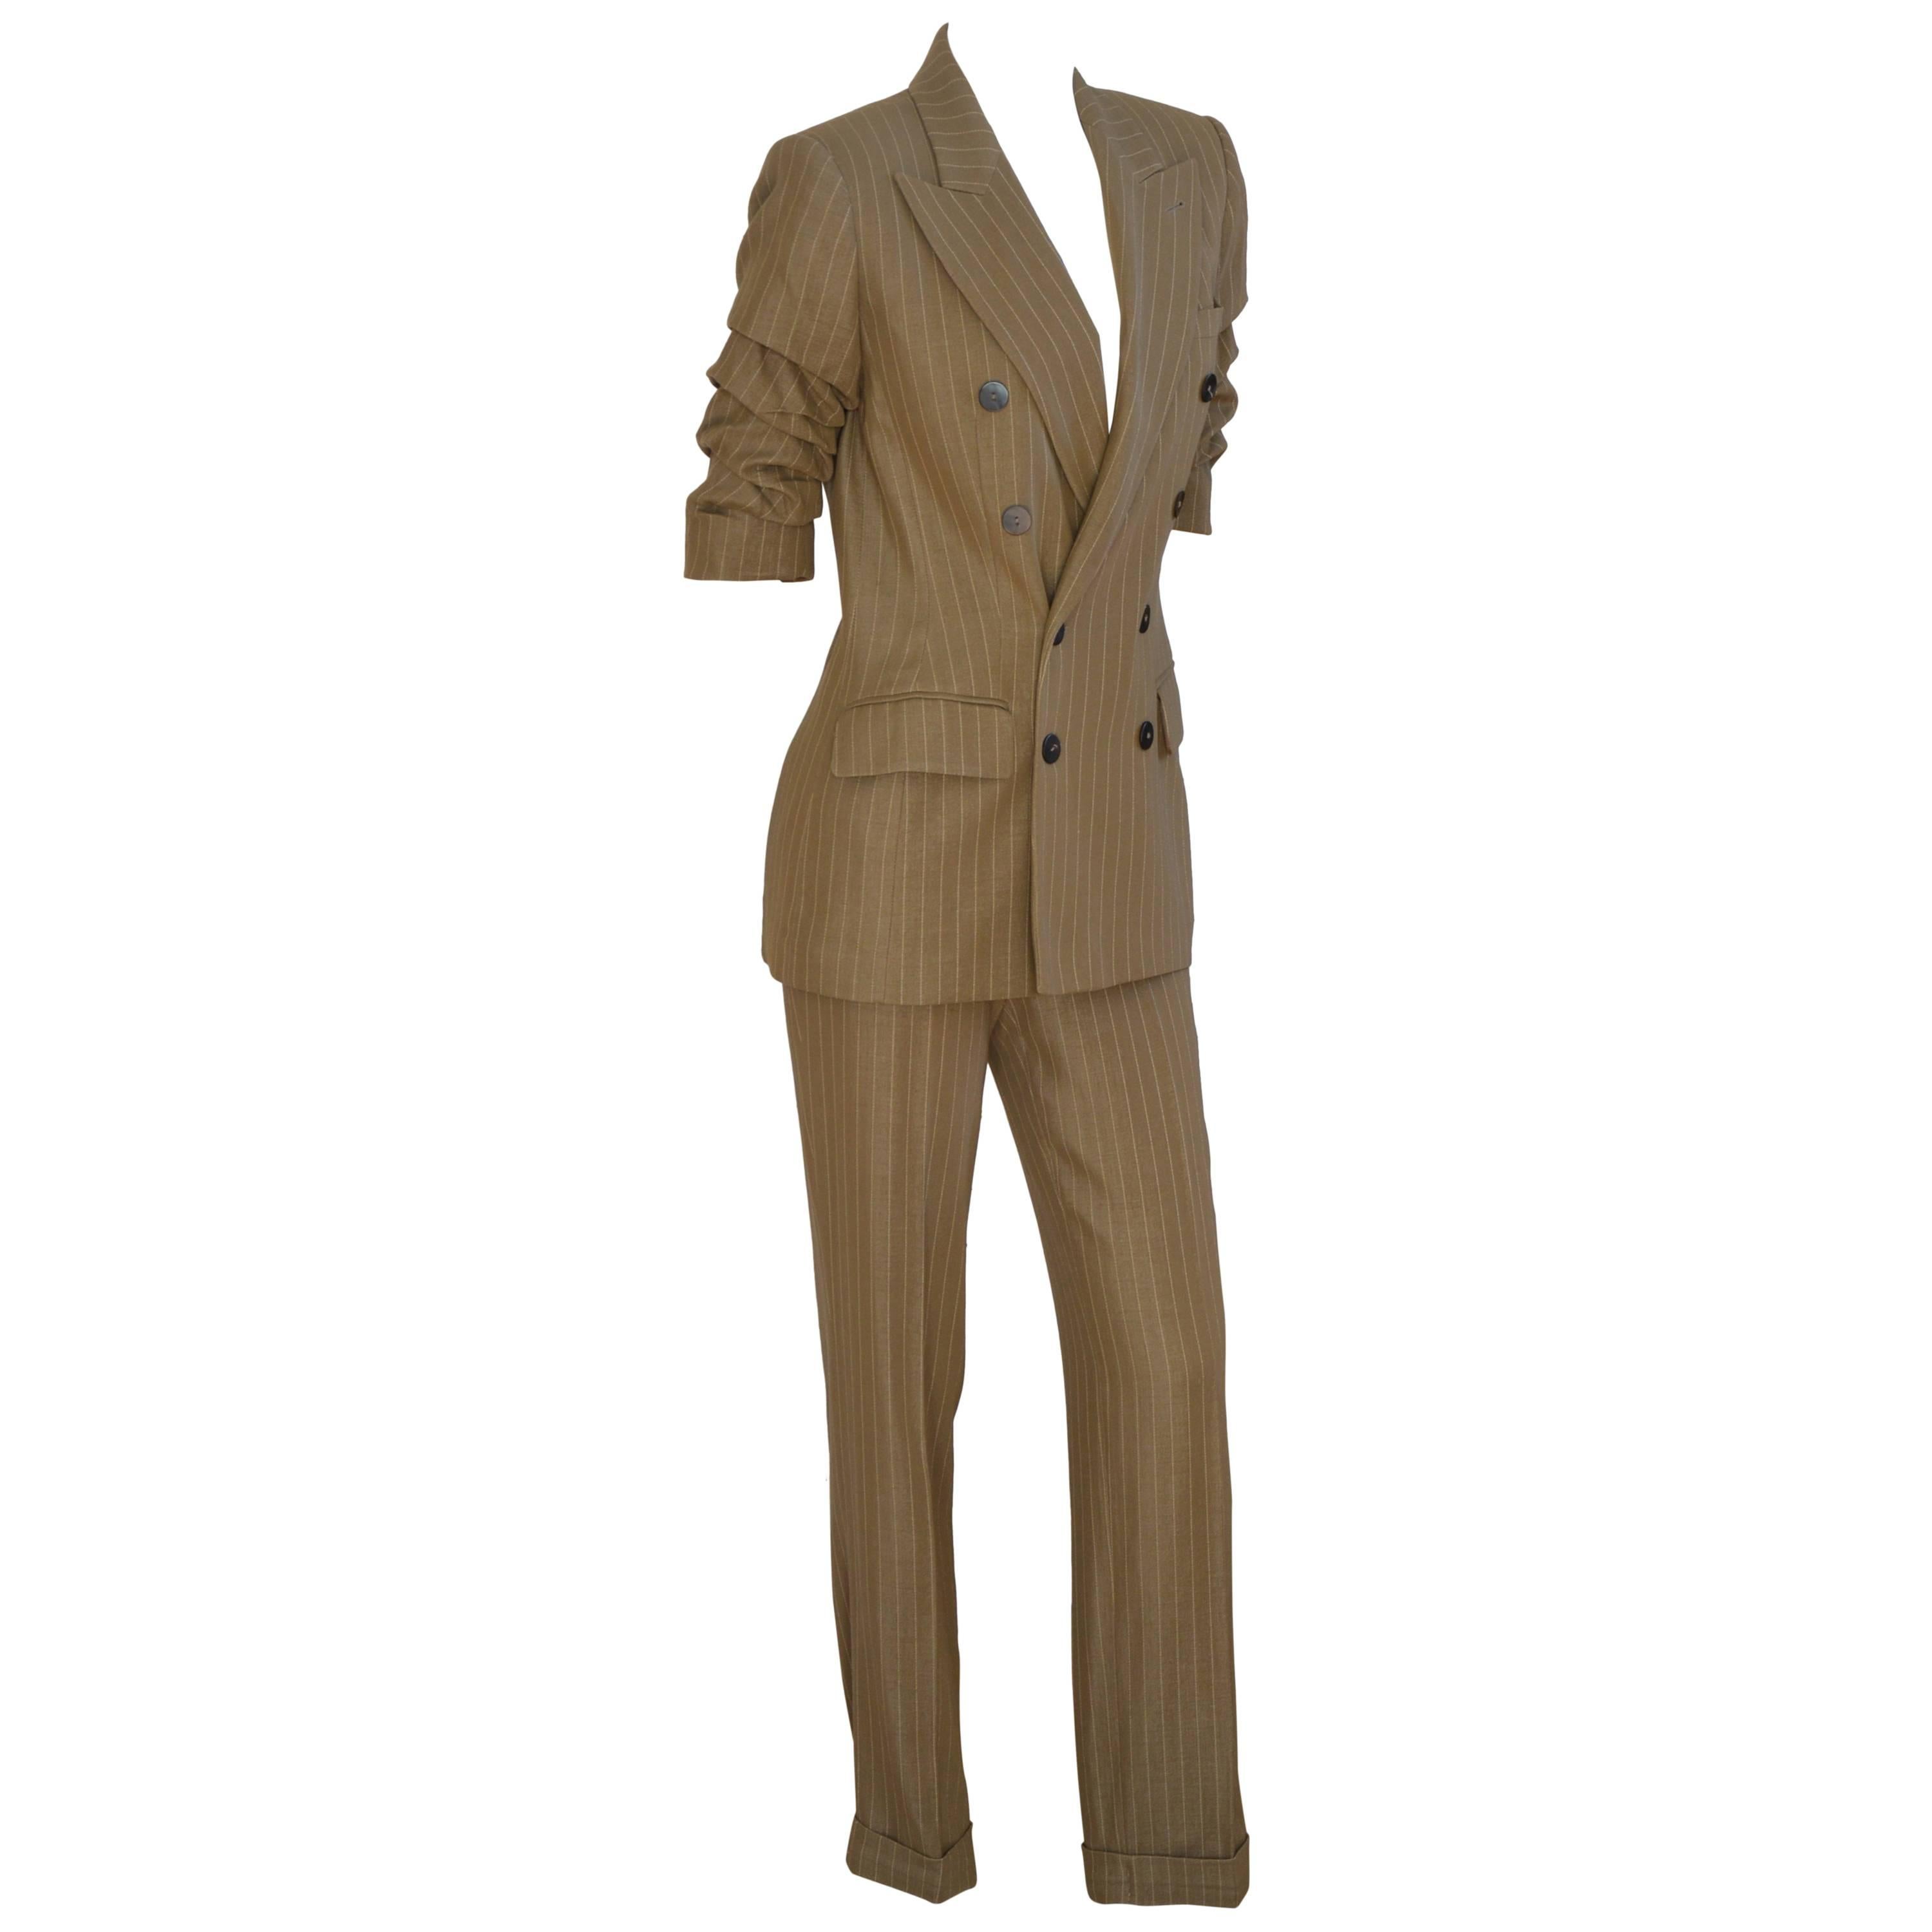 Vintage Jean Paul Gaultier pinstripe suit featuring traditional men's style double breasted vest. Caramel Brown New Wool suit.